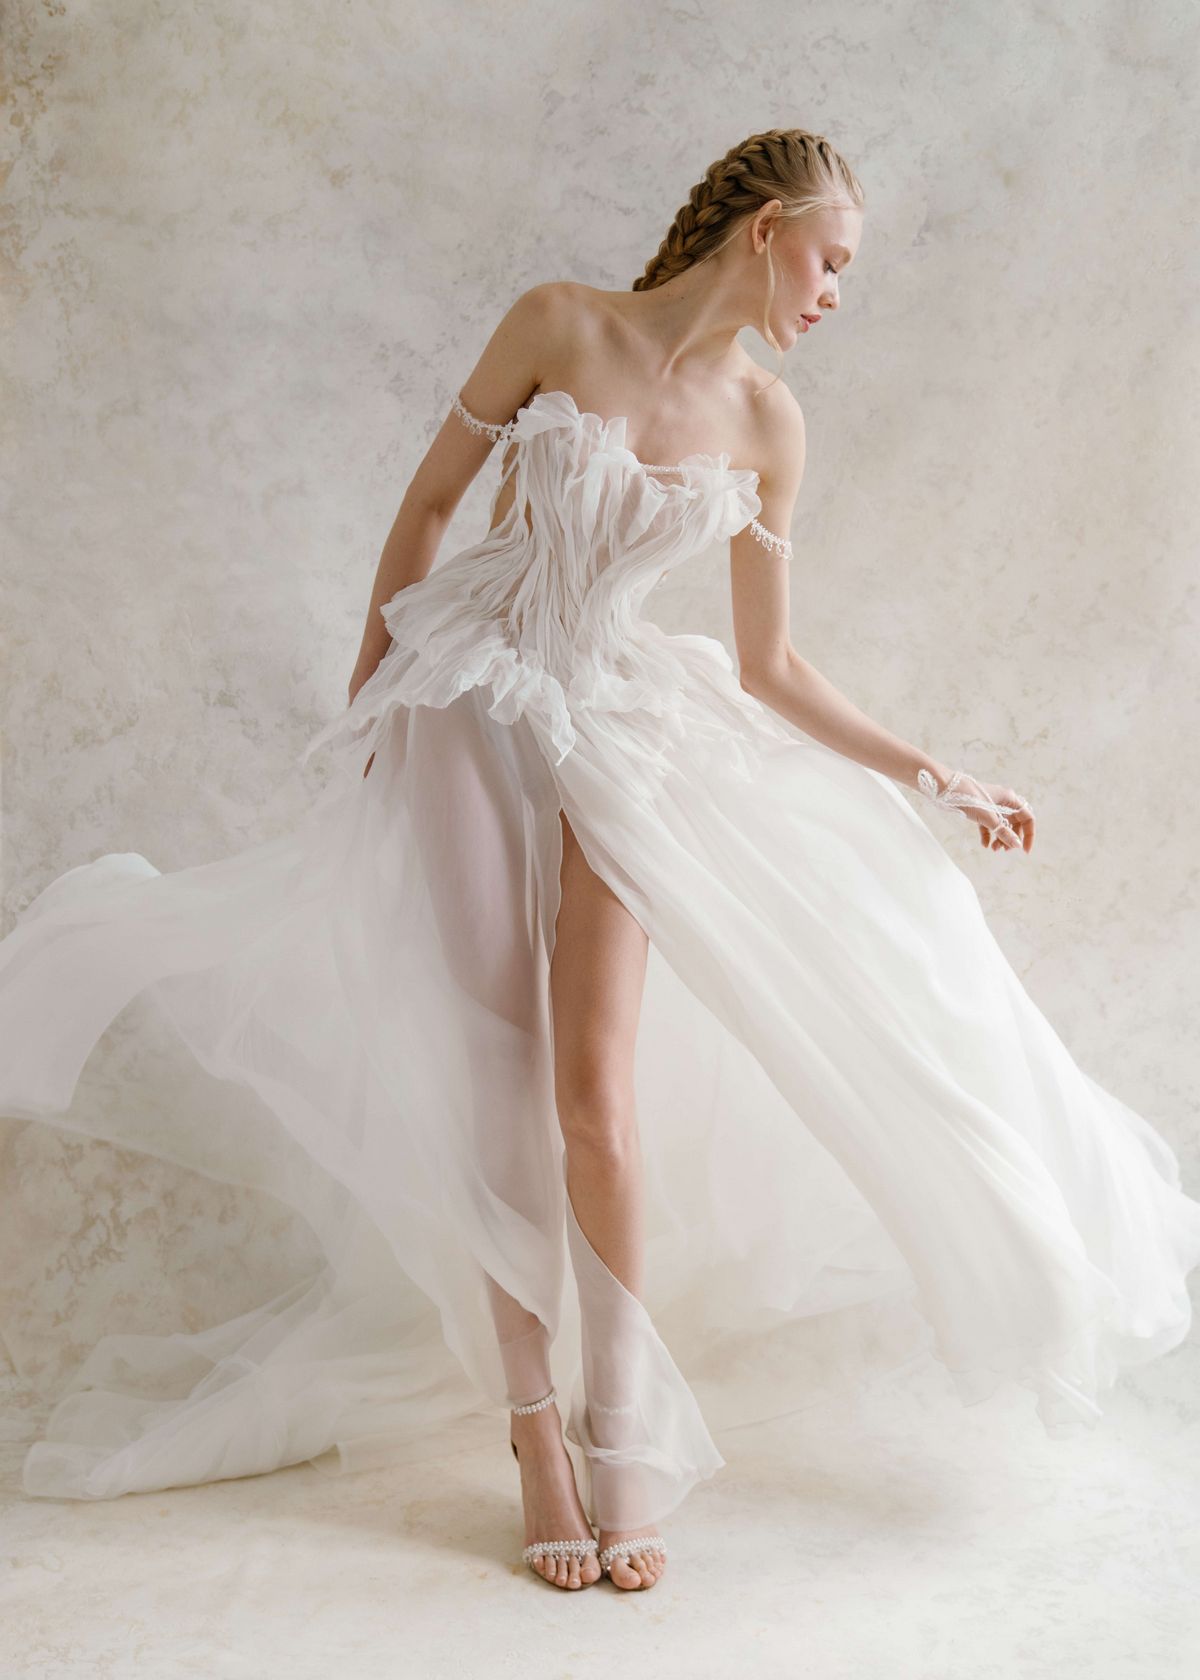 Rara Avis new trend wedding dress Minerale with detachable sleeves at Dell'Amore Bridal, NZ. 10